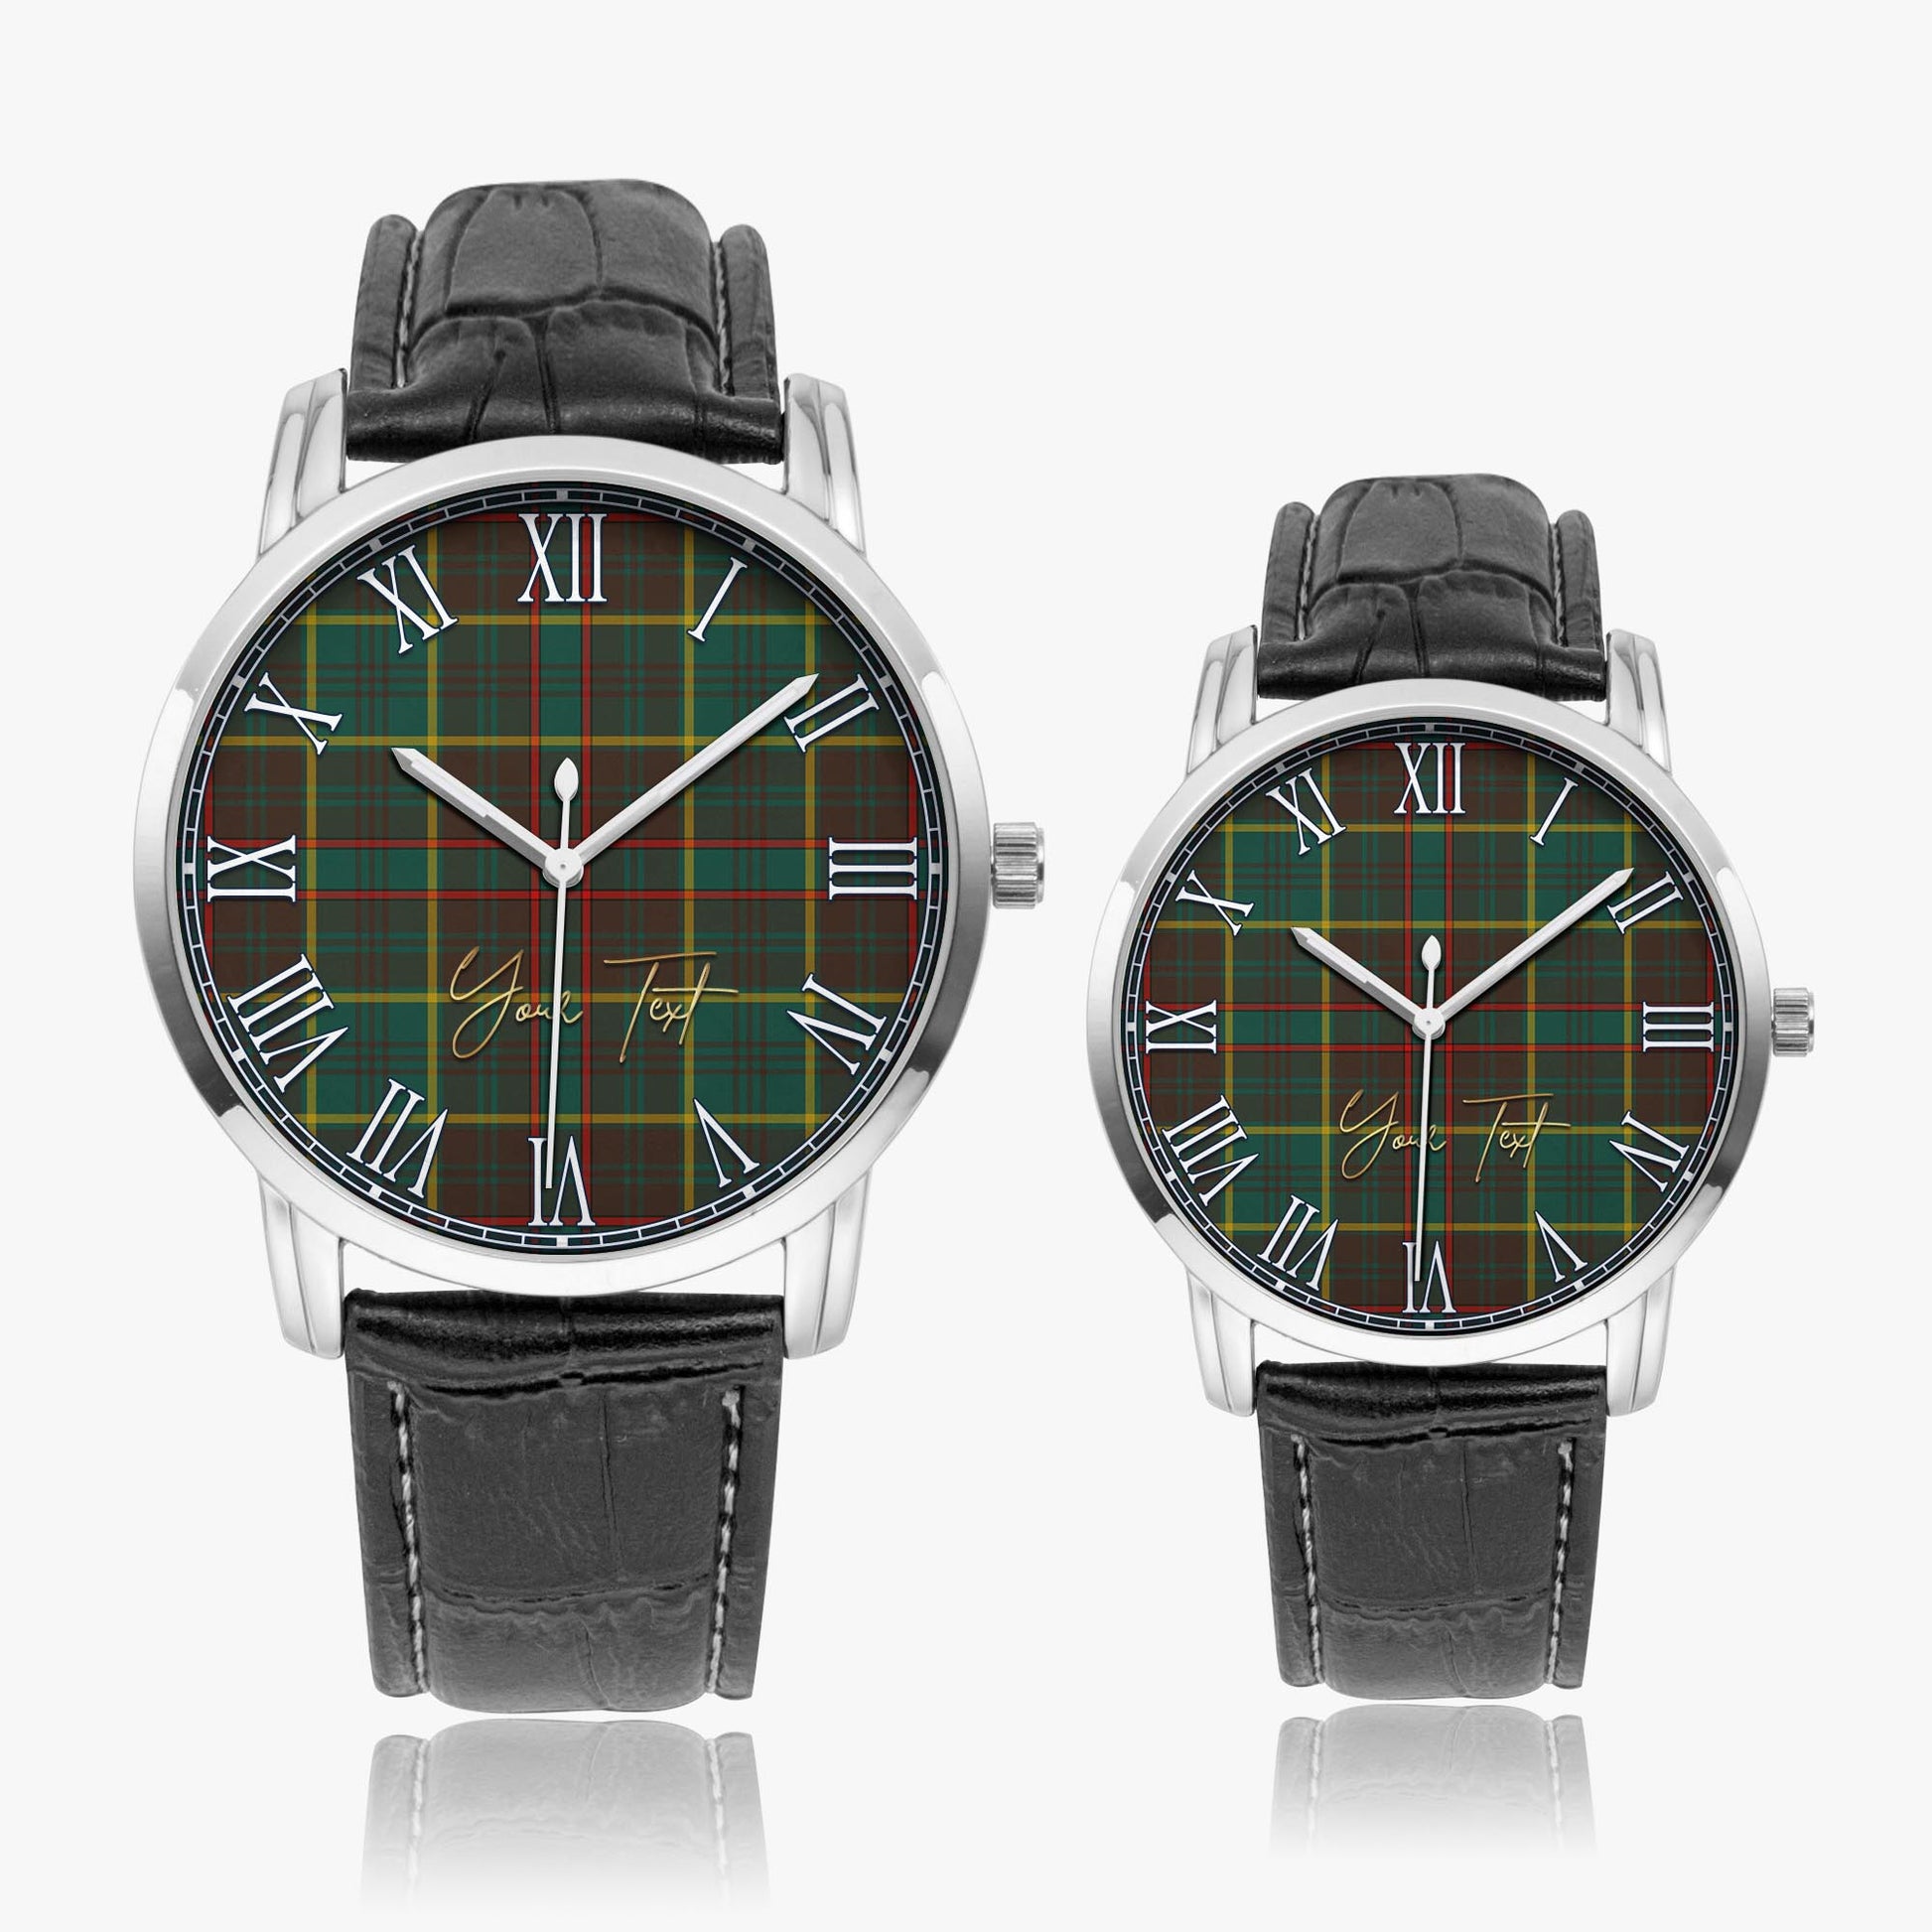 Ontario Province Canada Tartan Personalized Your Text Leather Trap Quartz Watch Wide Type Silver Case With Black Leather Strap - Tartanvibesclothing